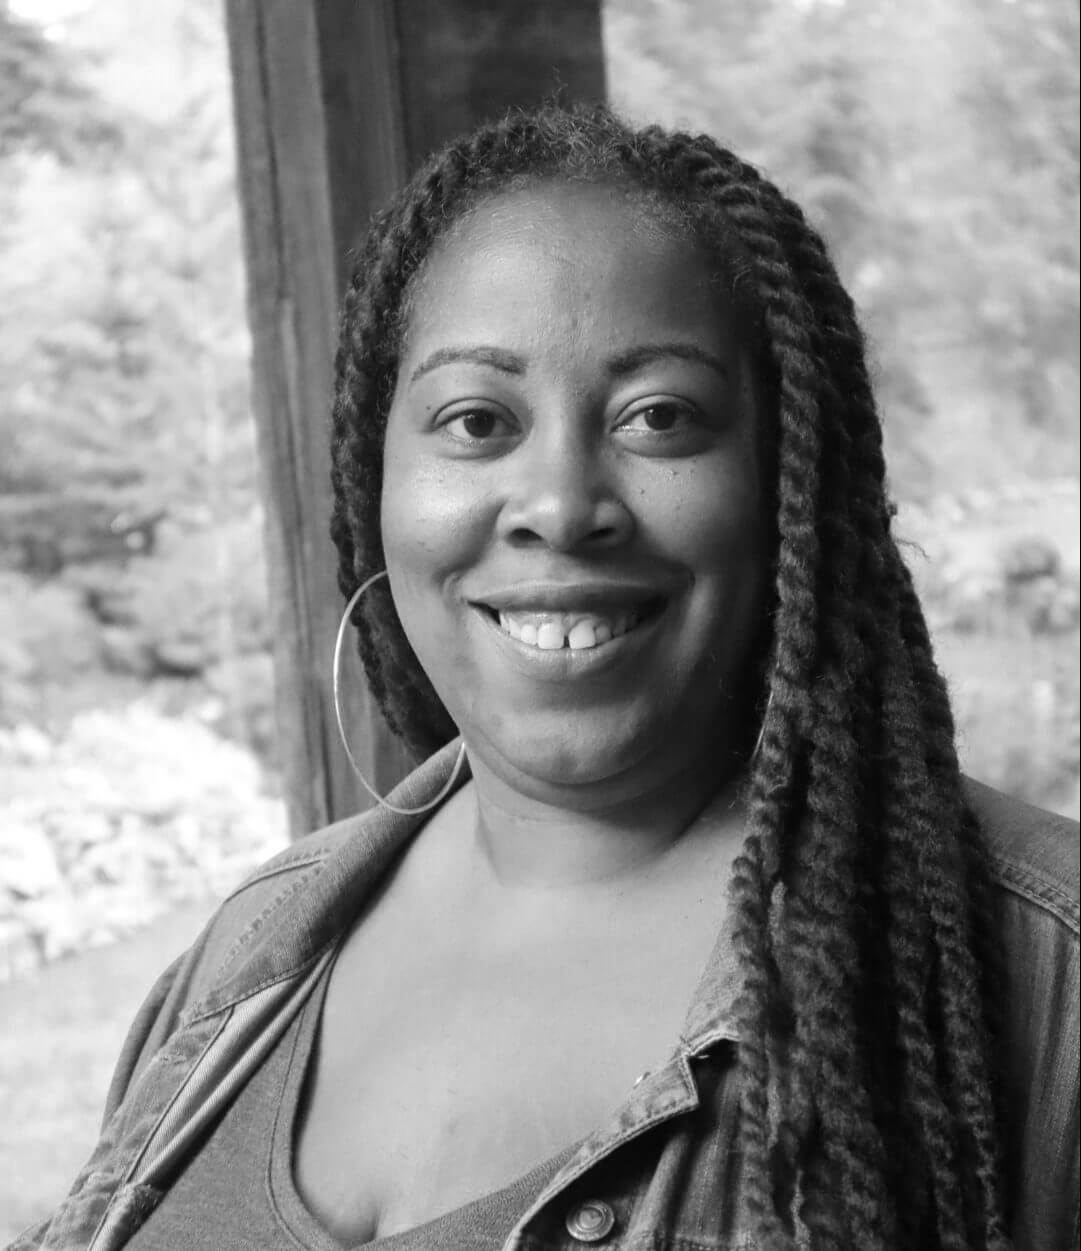 Angela Tucker looking directly at the camera and smiling. She is wearing a denim jacket, a turquoise shirt, and purple and brown crocheted dreads. Black and white portrait